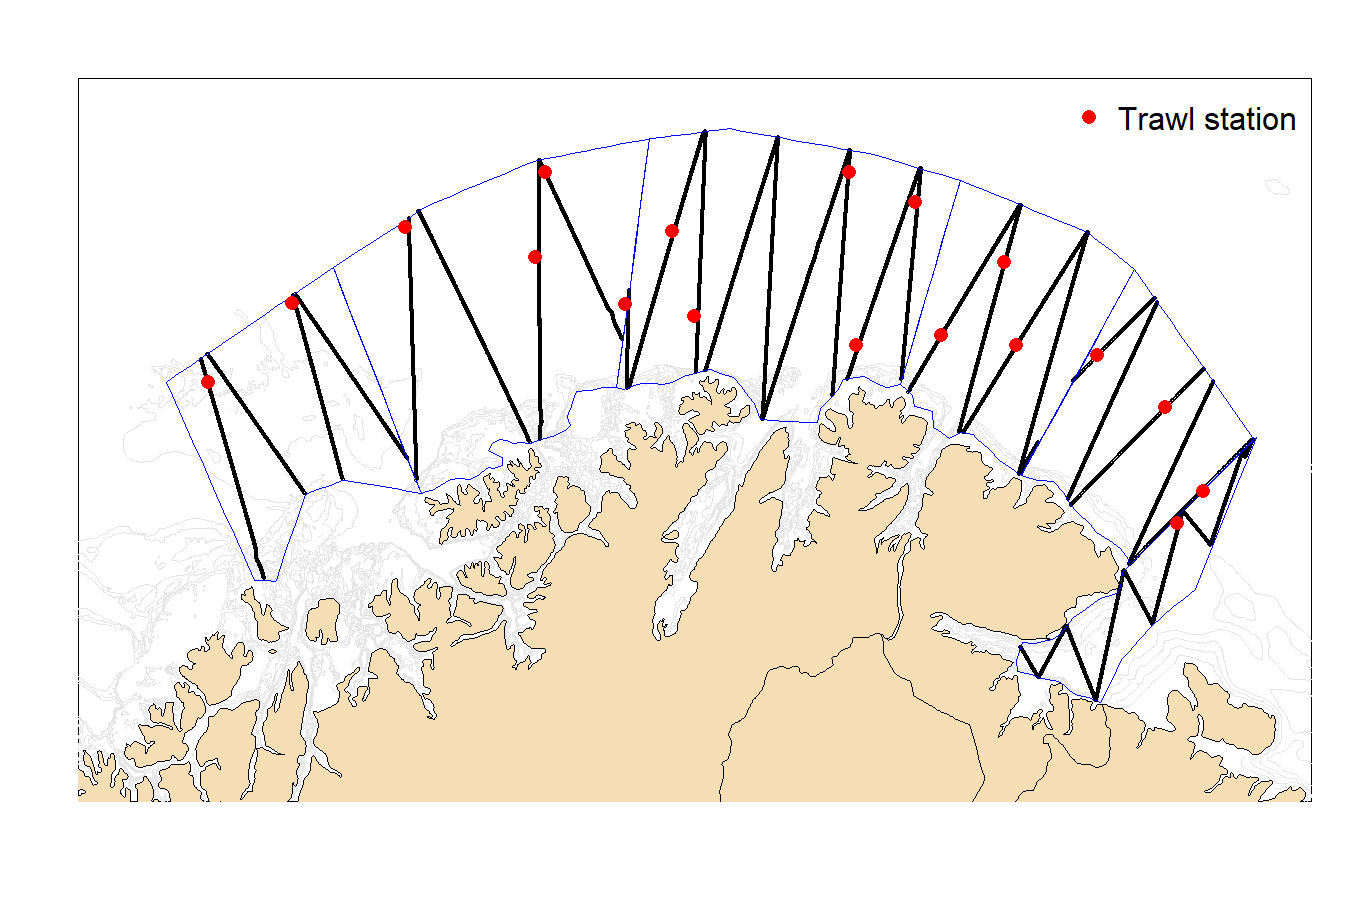 Figure 1. Survey coverage for Vendla with 6 strata, zig-zag transects and coverage in each stratum reflecting the expectancy of finding capelin. Trawl stations are marked as red dots.